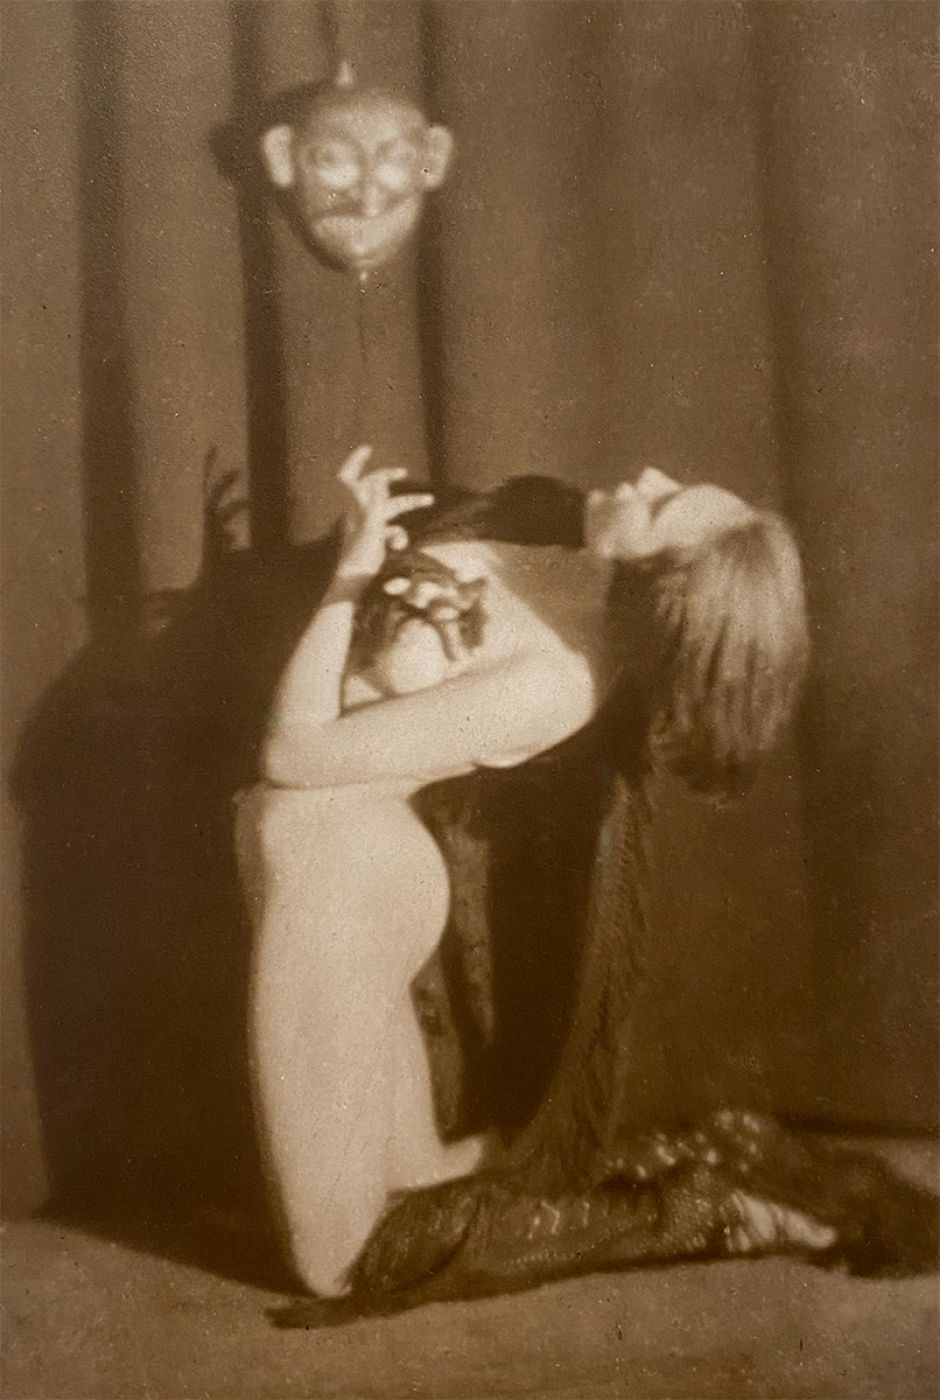 Germaine Krull, “Dance Study with Mask (from “Spuk" Series)”, 1923